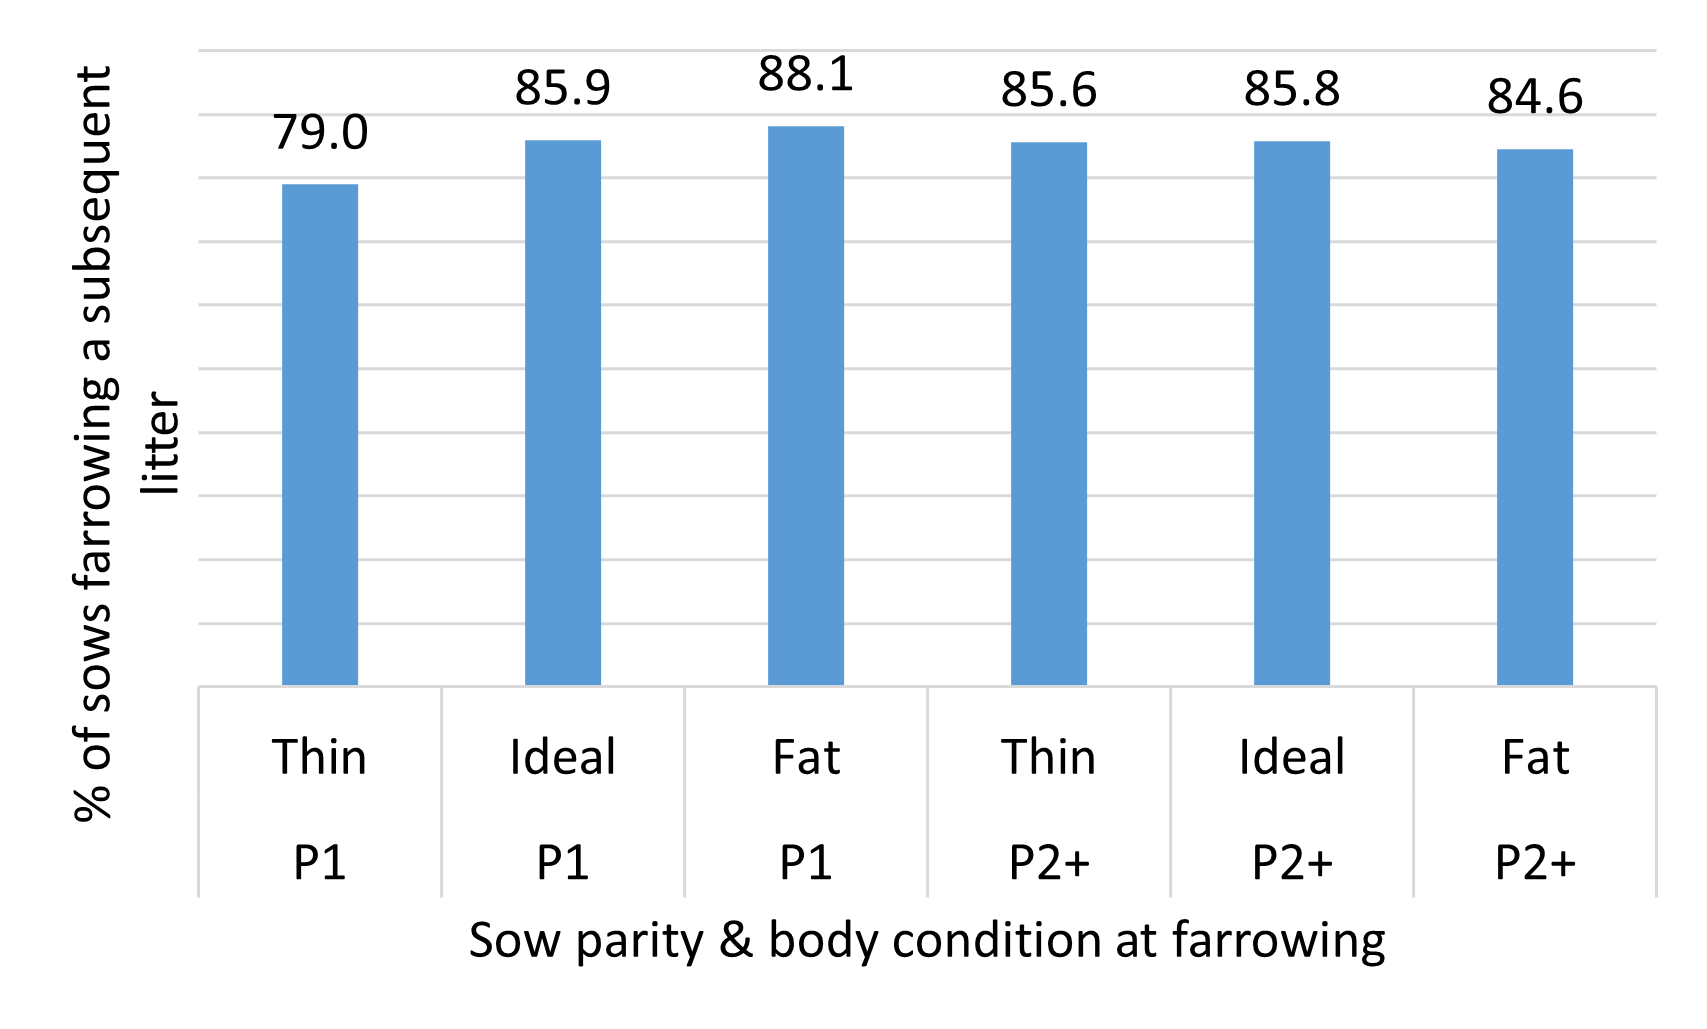 Impact of parity and prefarrow body condition score during periods of heat stress